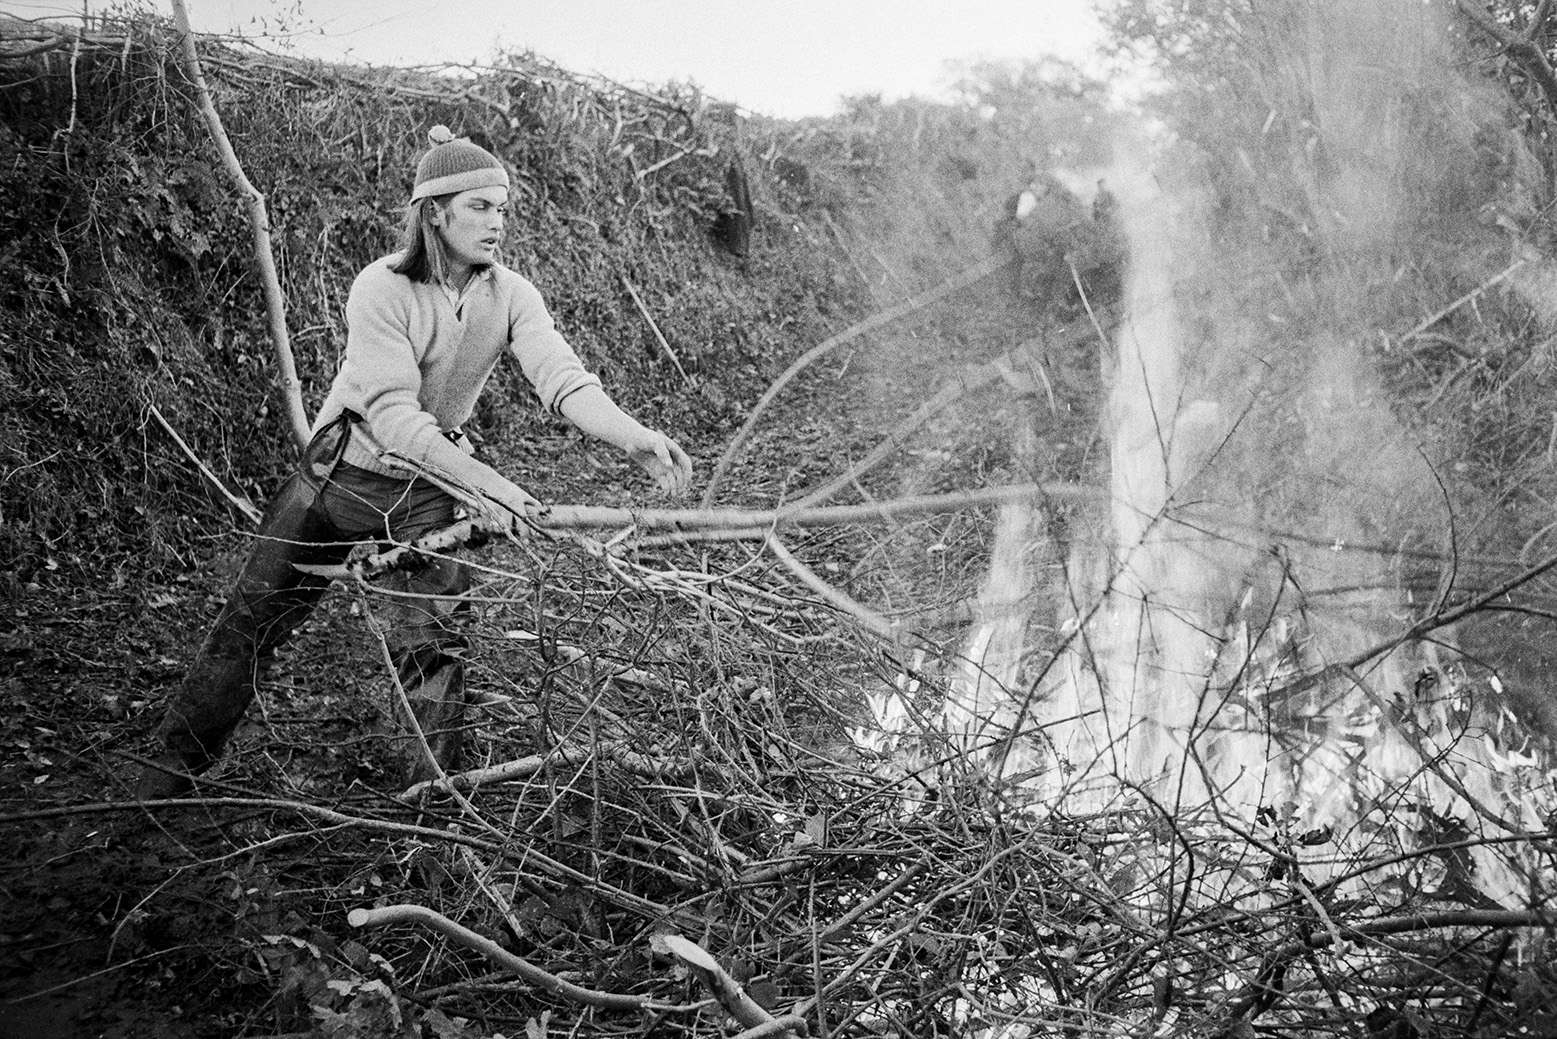 Derek Bright burning hedge cuttings, possibly in Green Lane at Beaford. He is wearing protective clothing over his legs. The hedge which has been laid can be seen in the background.